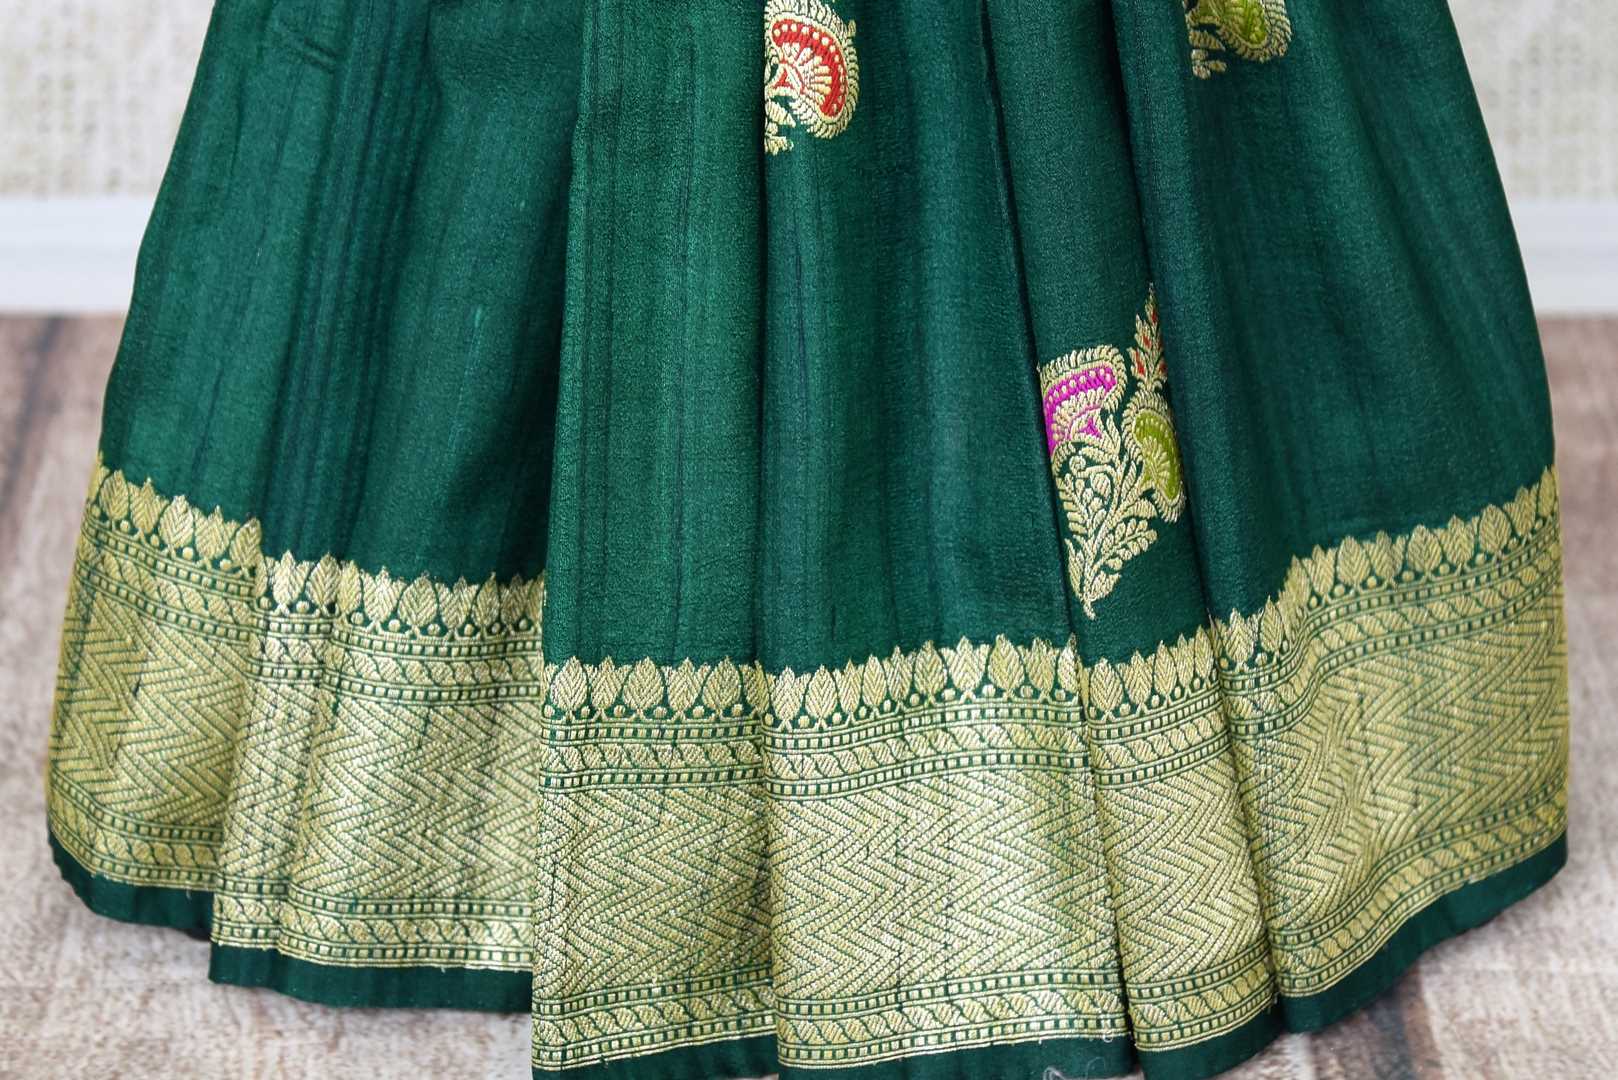 Buy bottle green khaddi Banarasi saree online in USA with minakari zari floral buta. Feel traditional on special occasions in beautiful Indian designer saris from Pure Elegance Indian fashion store in USA. Choose from a splendid variety of Banarasi sarees, pure handwoven saris. Buy online.-pleats